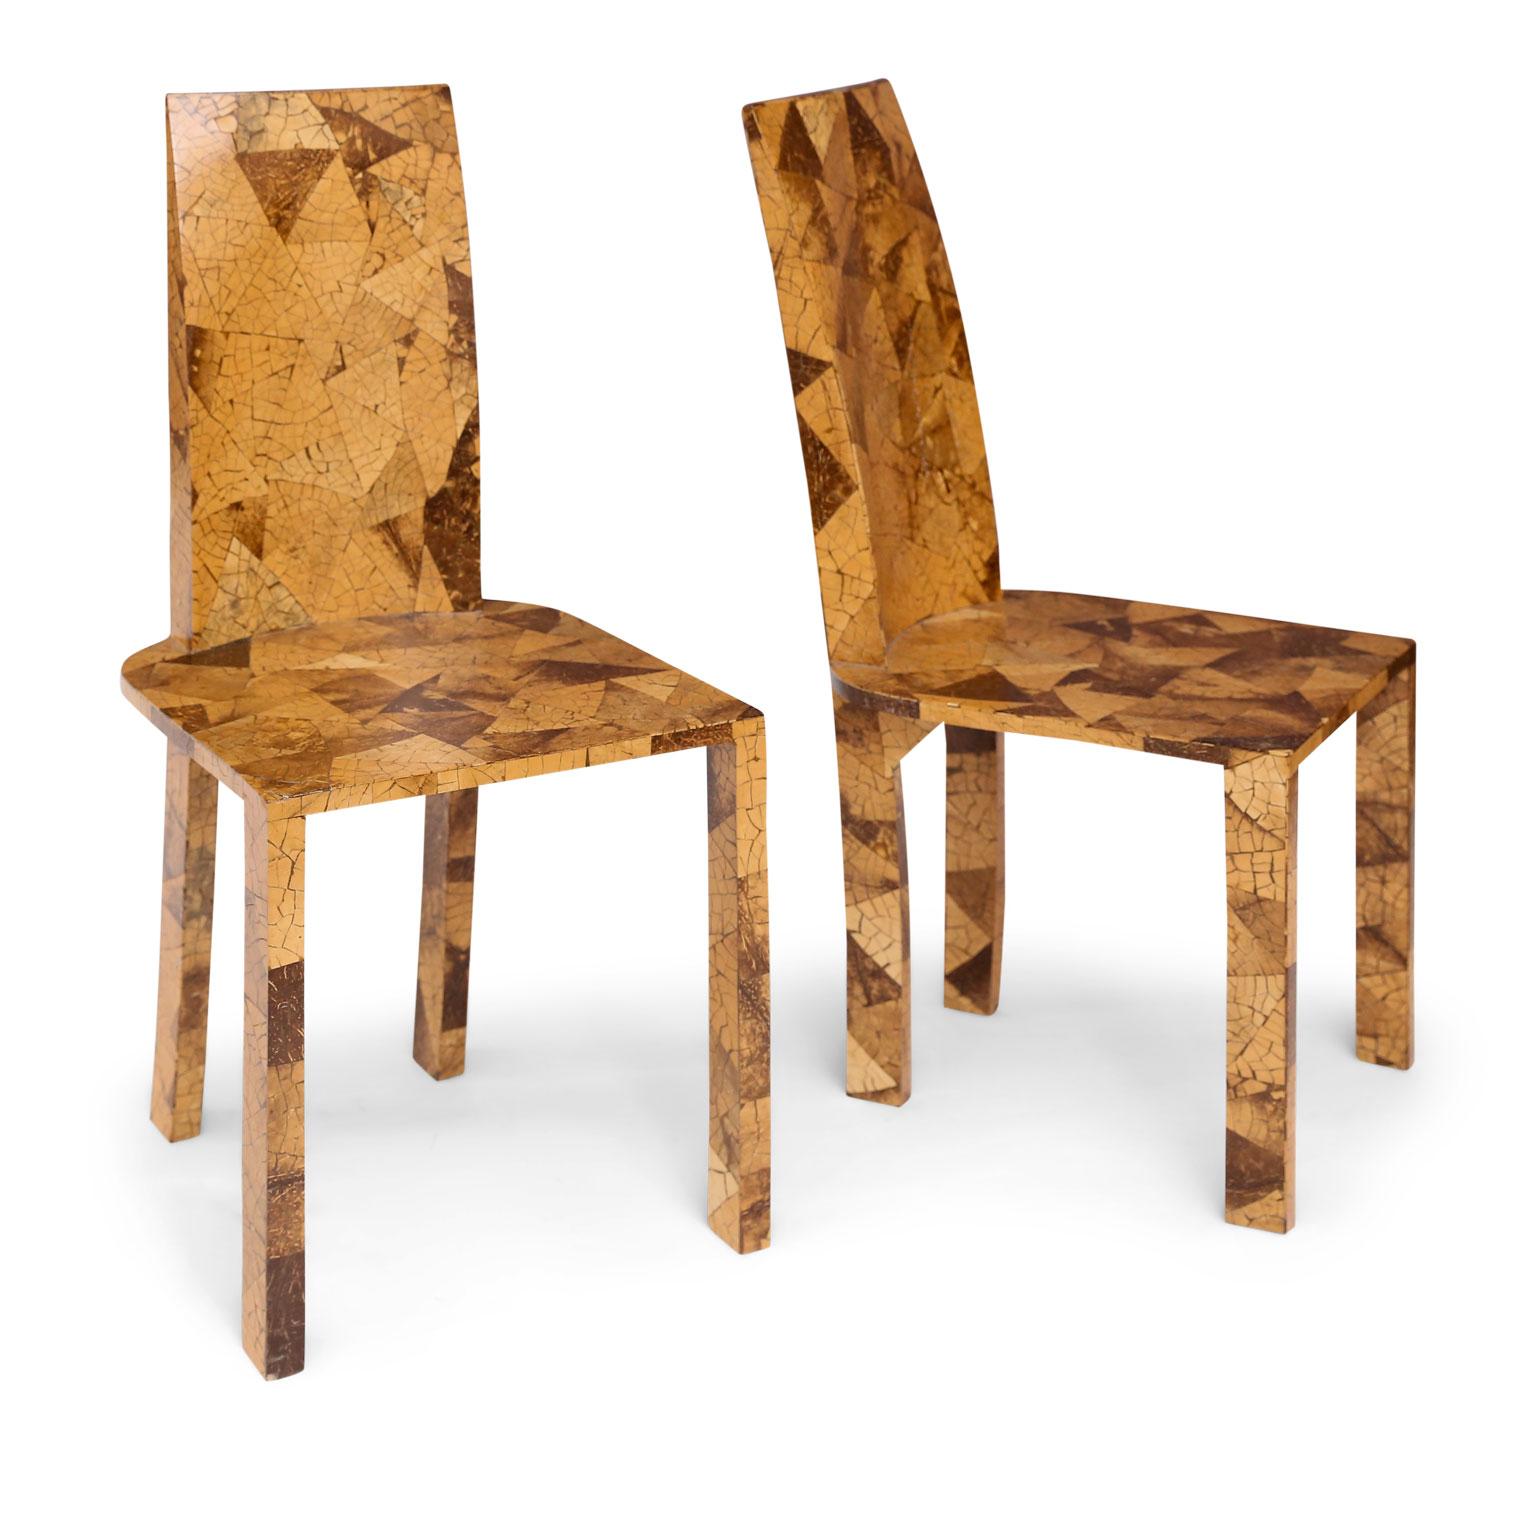 Pair of midcentury veneered side chairs in a clear lacquer finish. Veneer applied in a mosaic of light and dark wood triangular patterns. Purchased in Paris and constructed circa 1970-1989 in the style of Karl Springer.